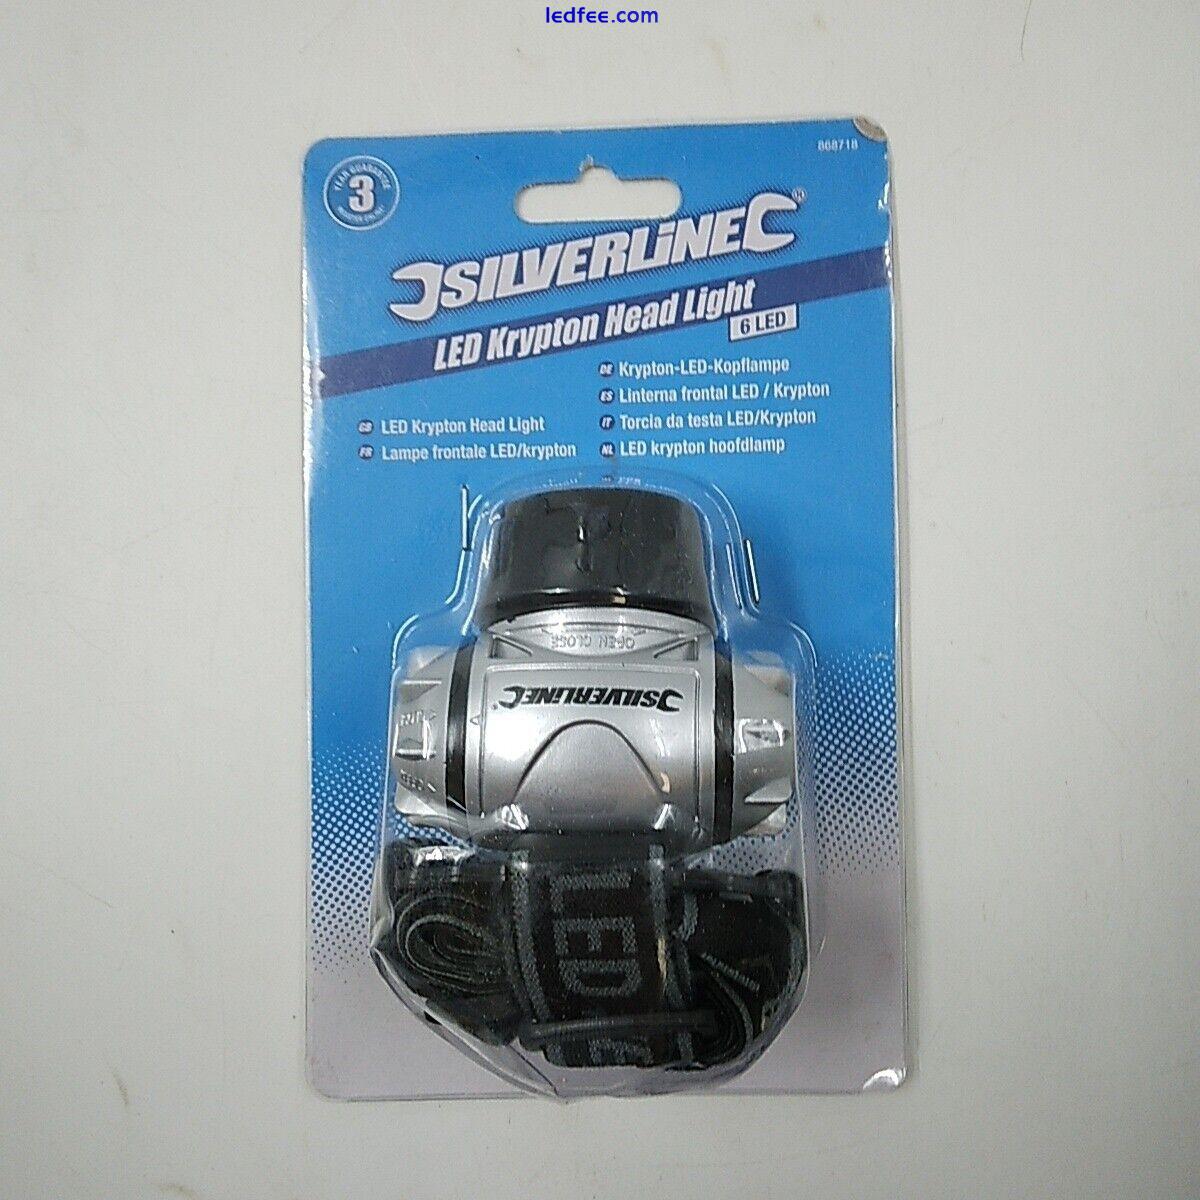 Silverline 6 LED Krypton Head Light Head Torches - New/Sealed Batteries Included 2 